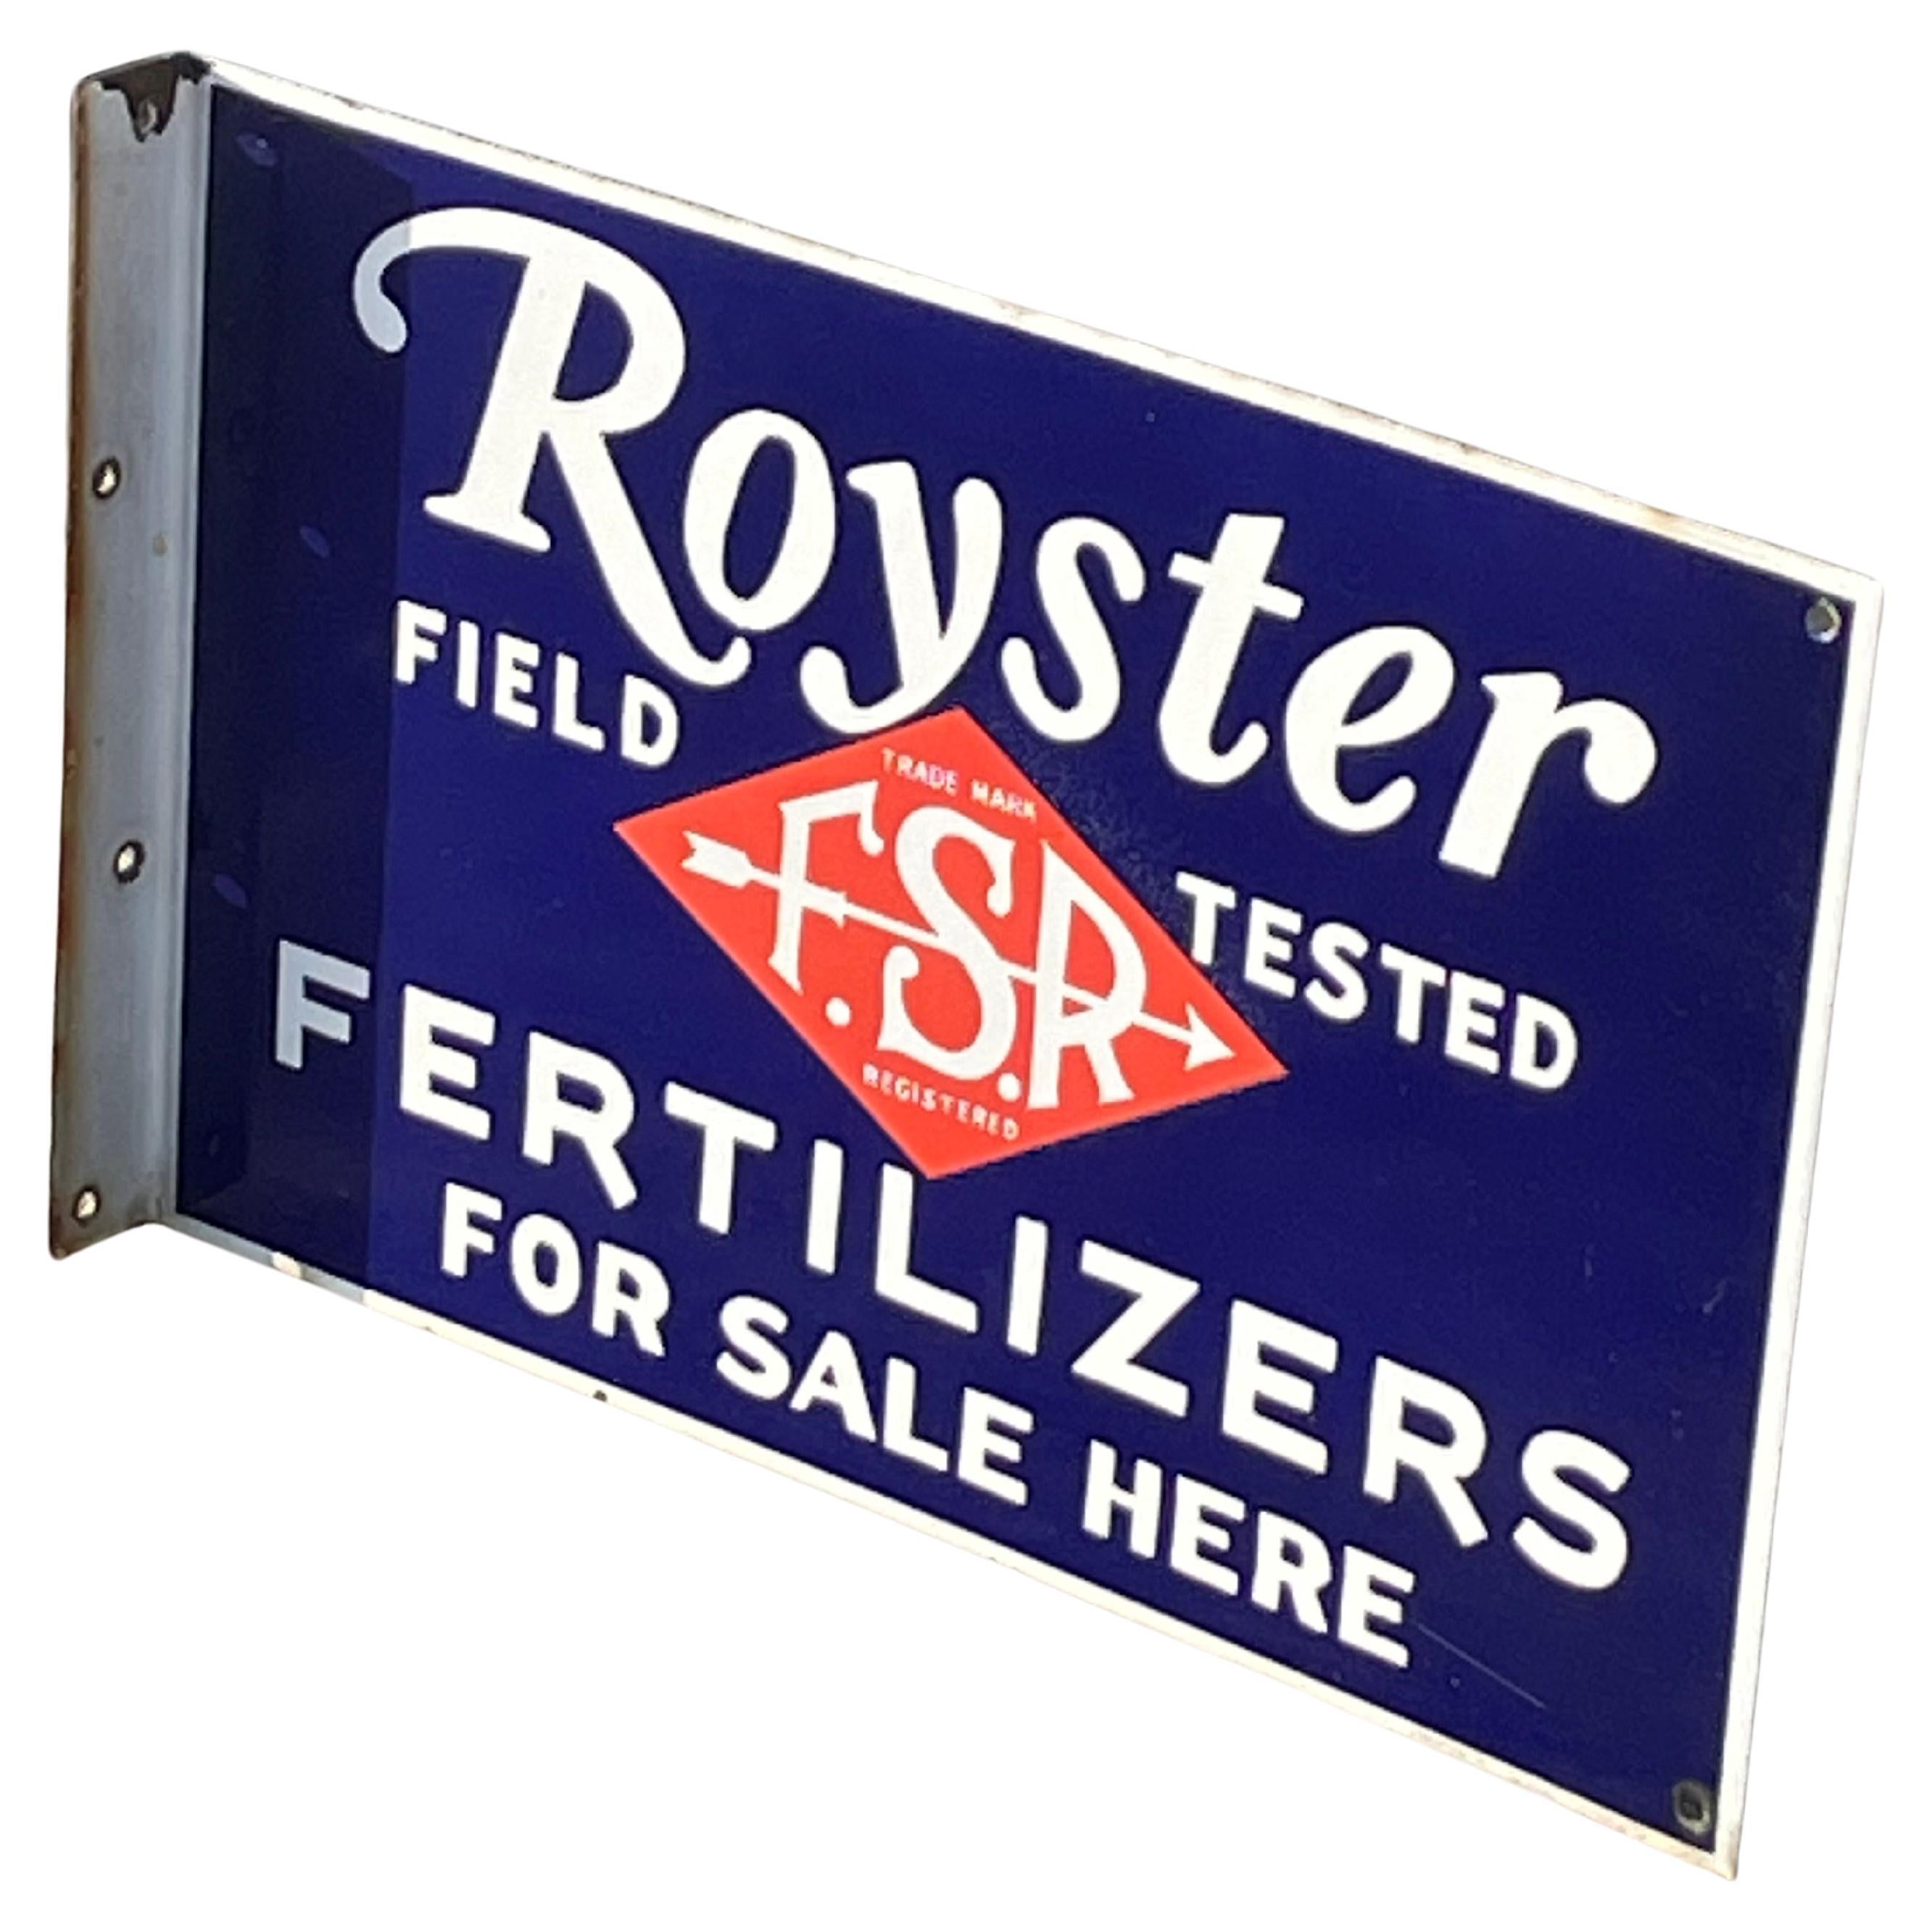 Royster Fertilizer Porcelain Two Sided Farm and Agricultural Farm Sign w/Flange